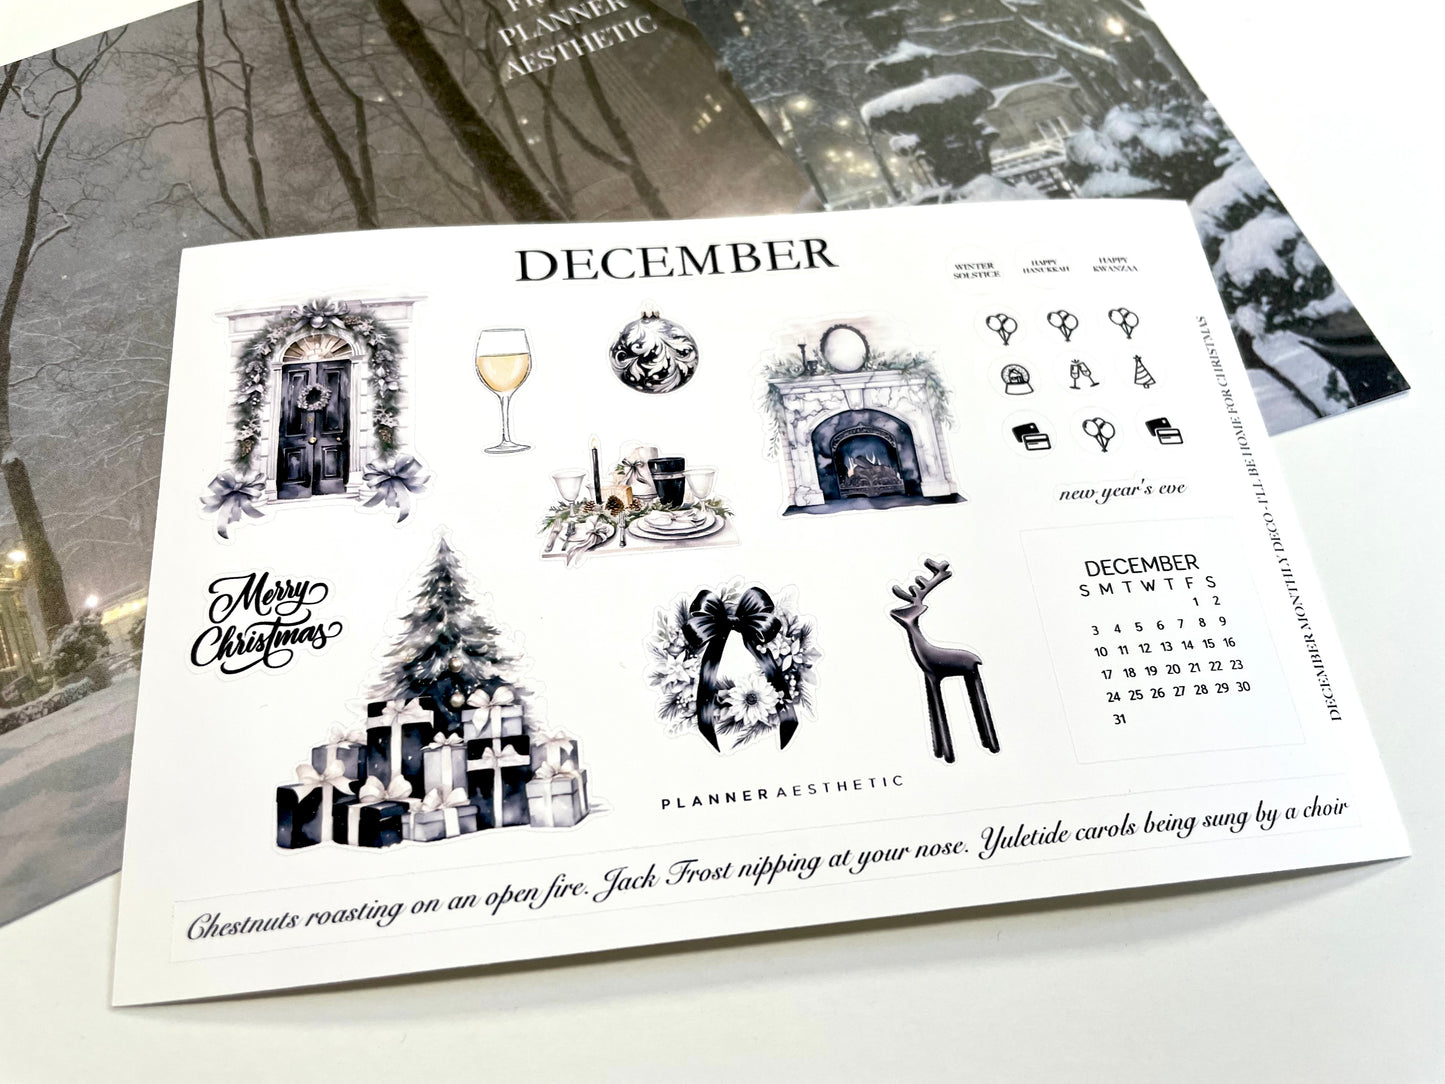 DECEMBER MONTHLY DECO - I'LL BE HOME FOR CHRISTMAS